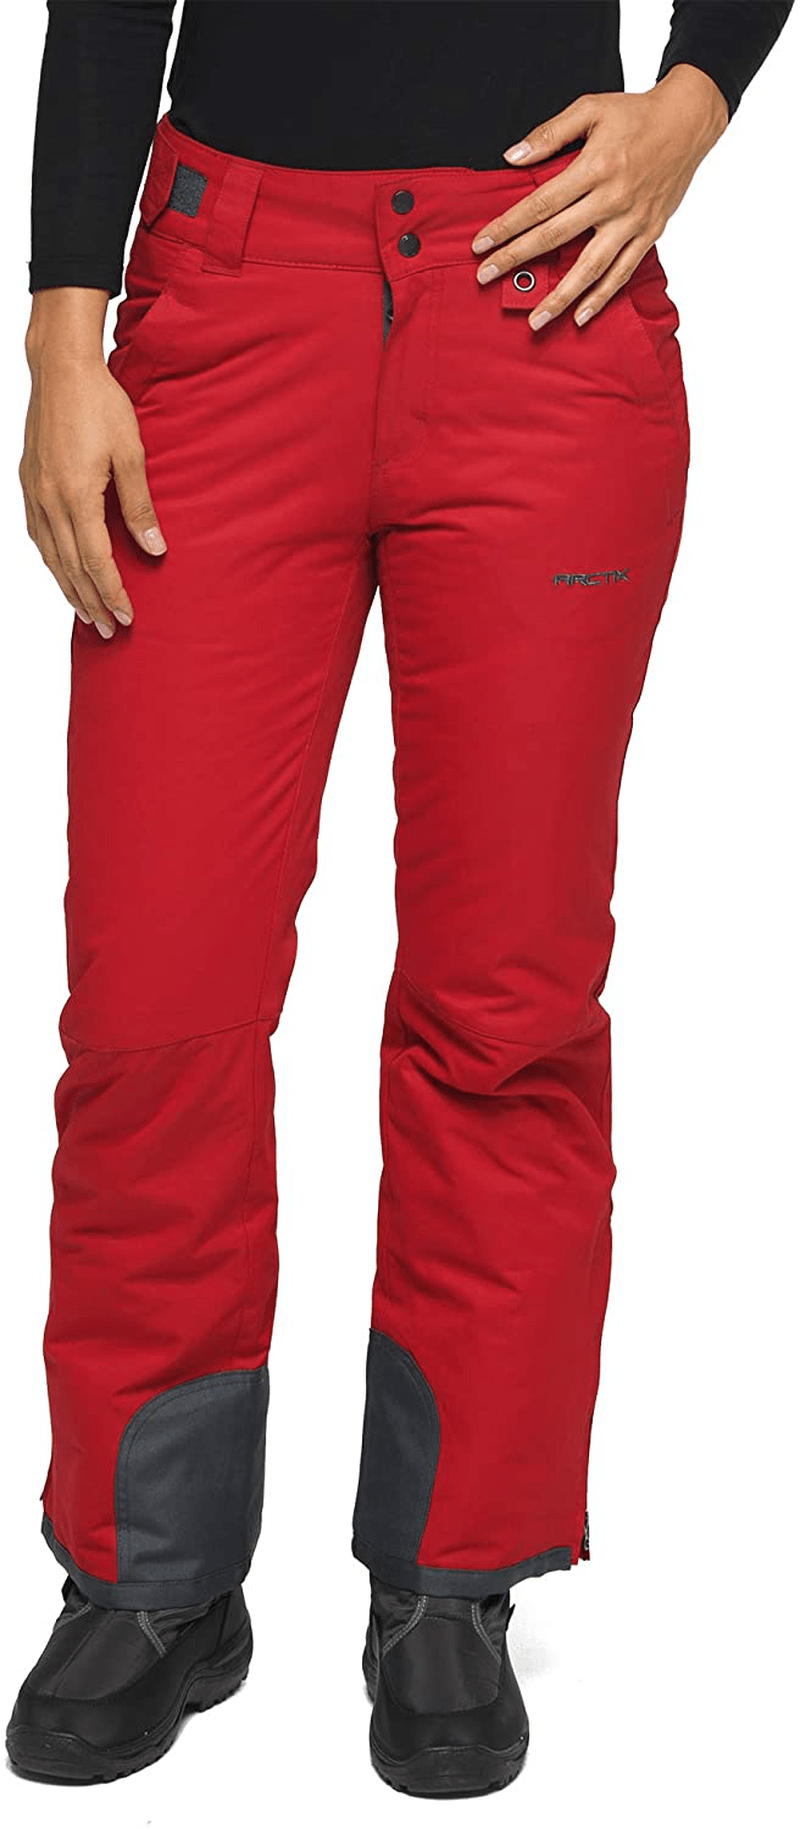 Arctix Women's Insulated Snow Pants Apparel & Accessories > Clothing > Outerwear > Snow Pants & Suits Arctix Vintage Red Medium Tall 